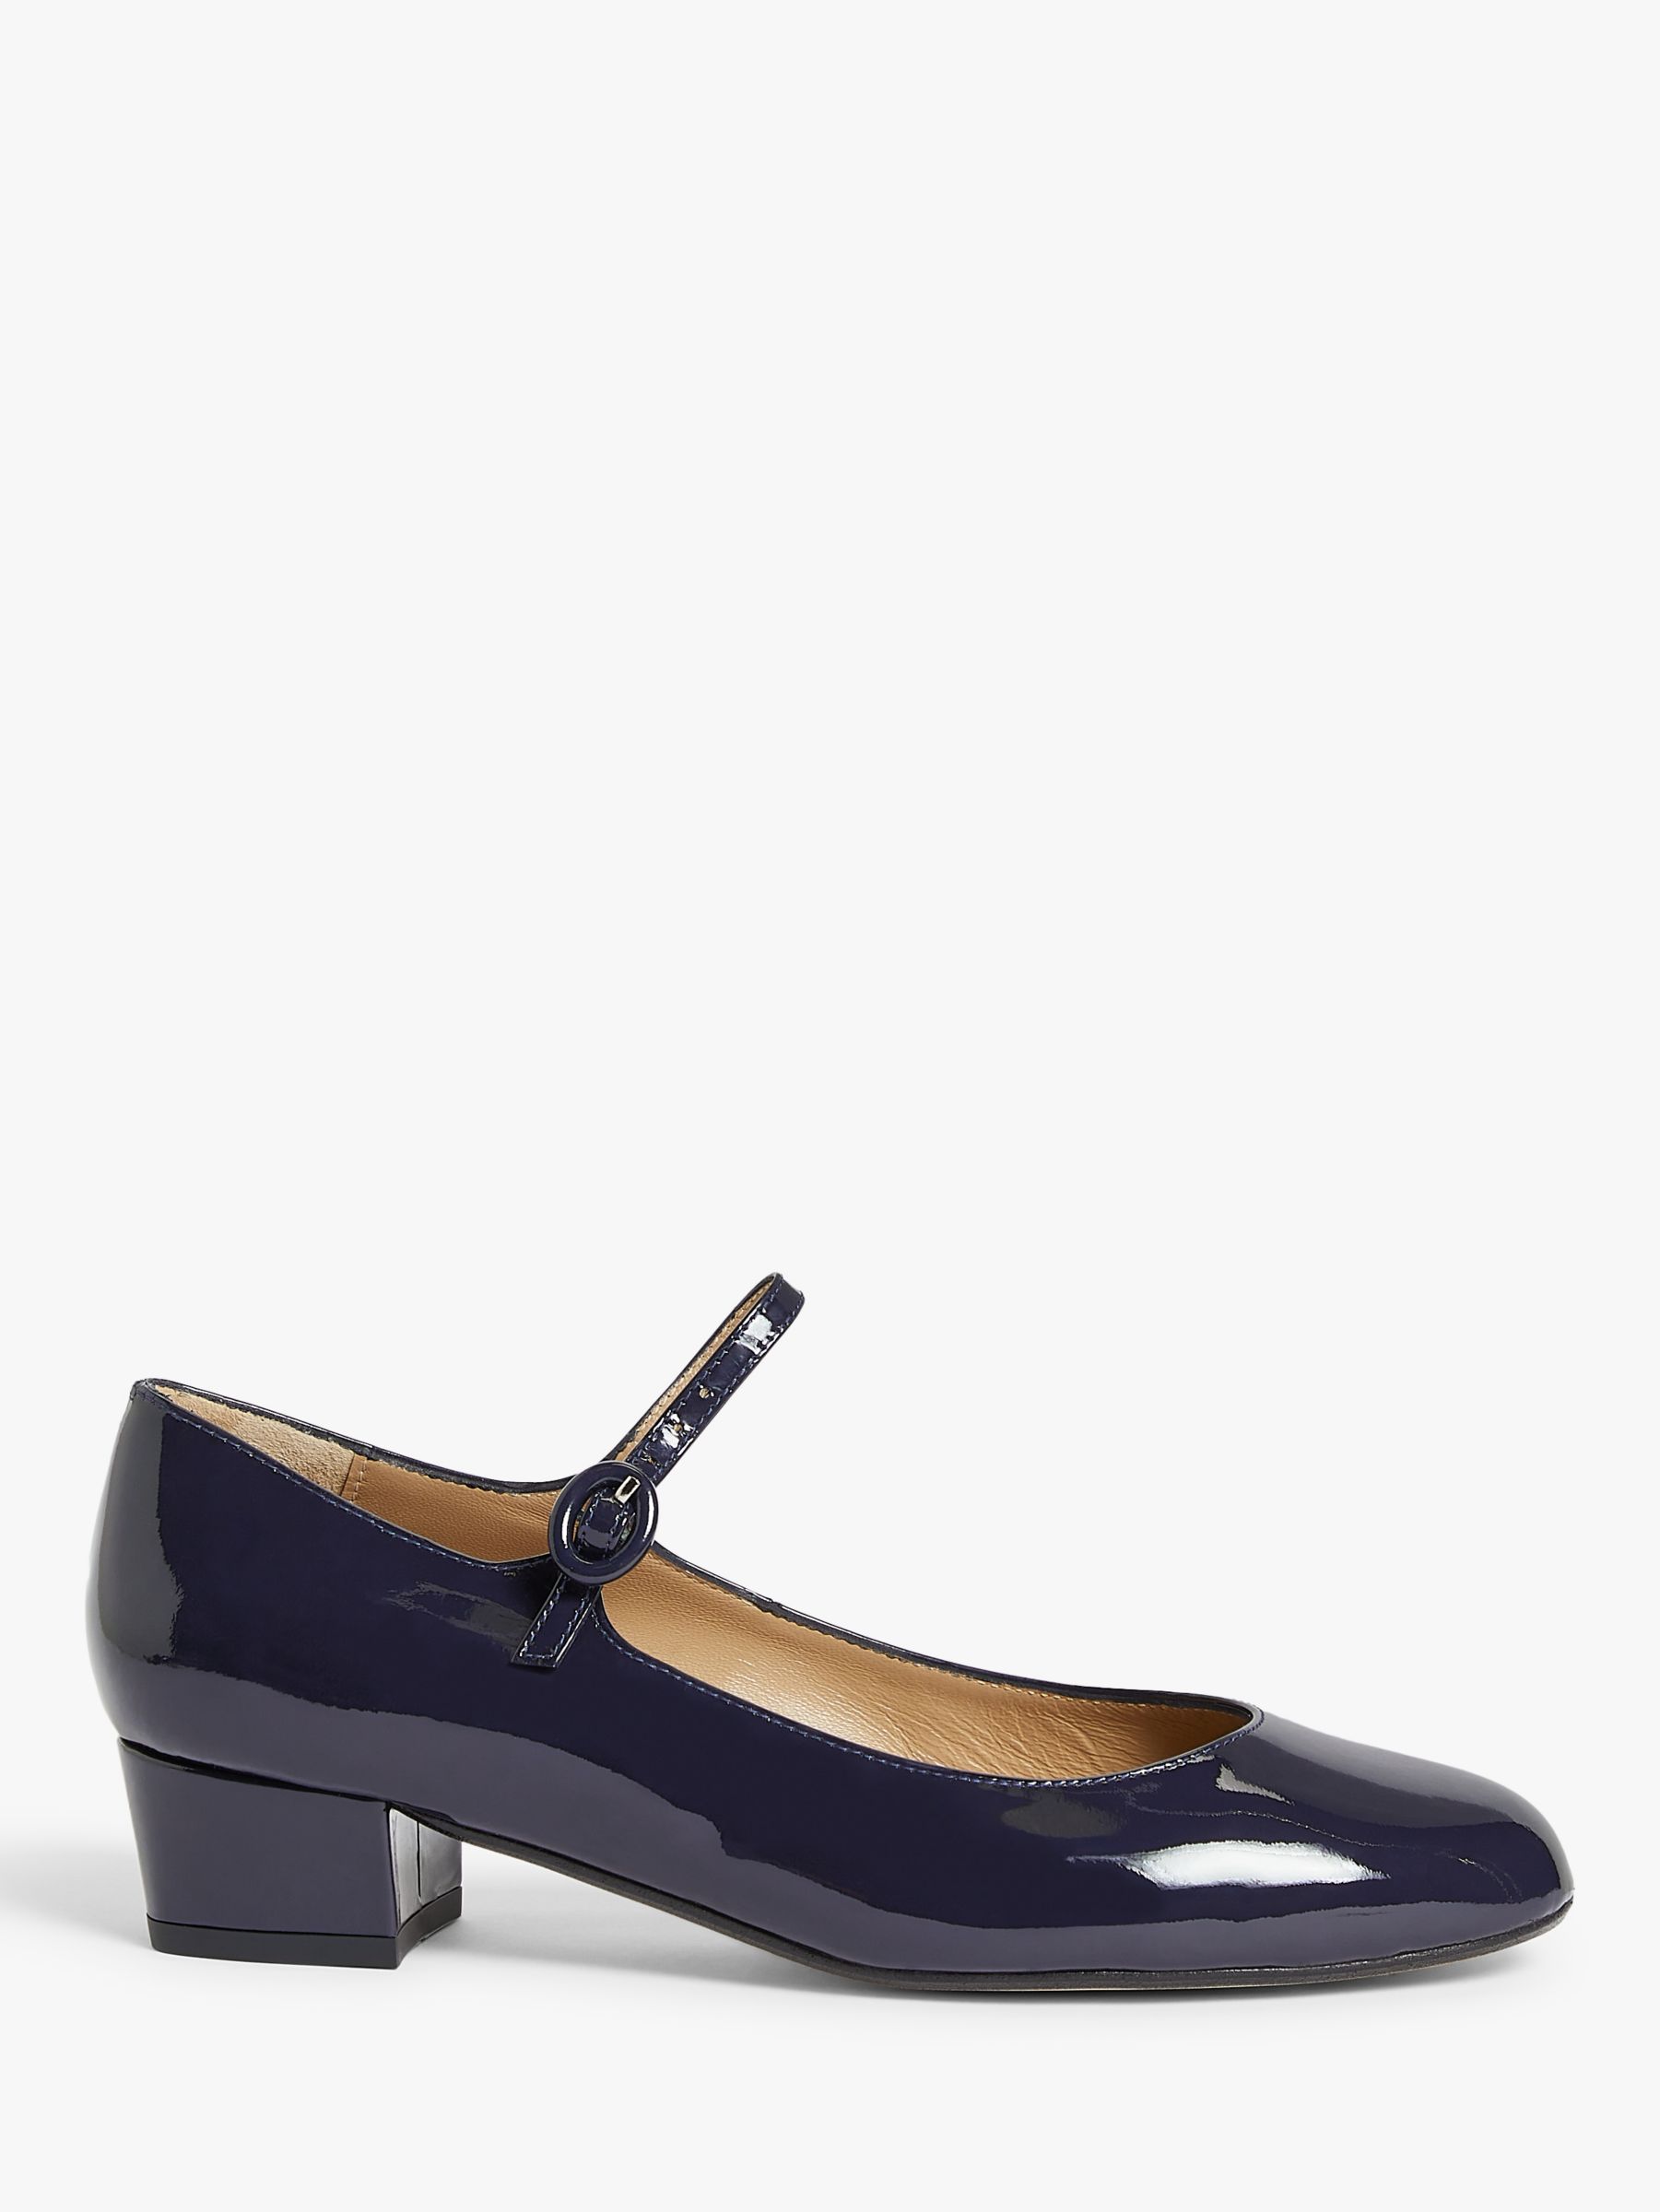 John Lewis & Partners Adora Patent Leather Mary Jane Court Shoes, Navy ...